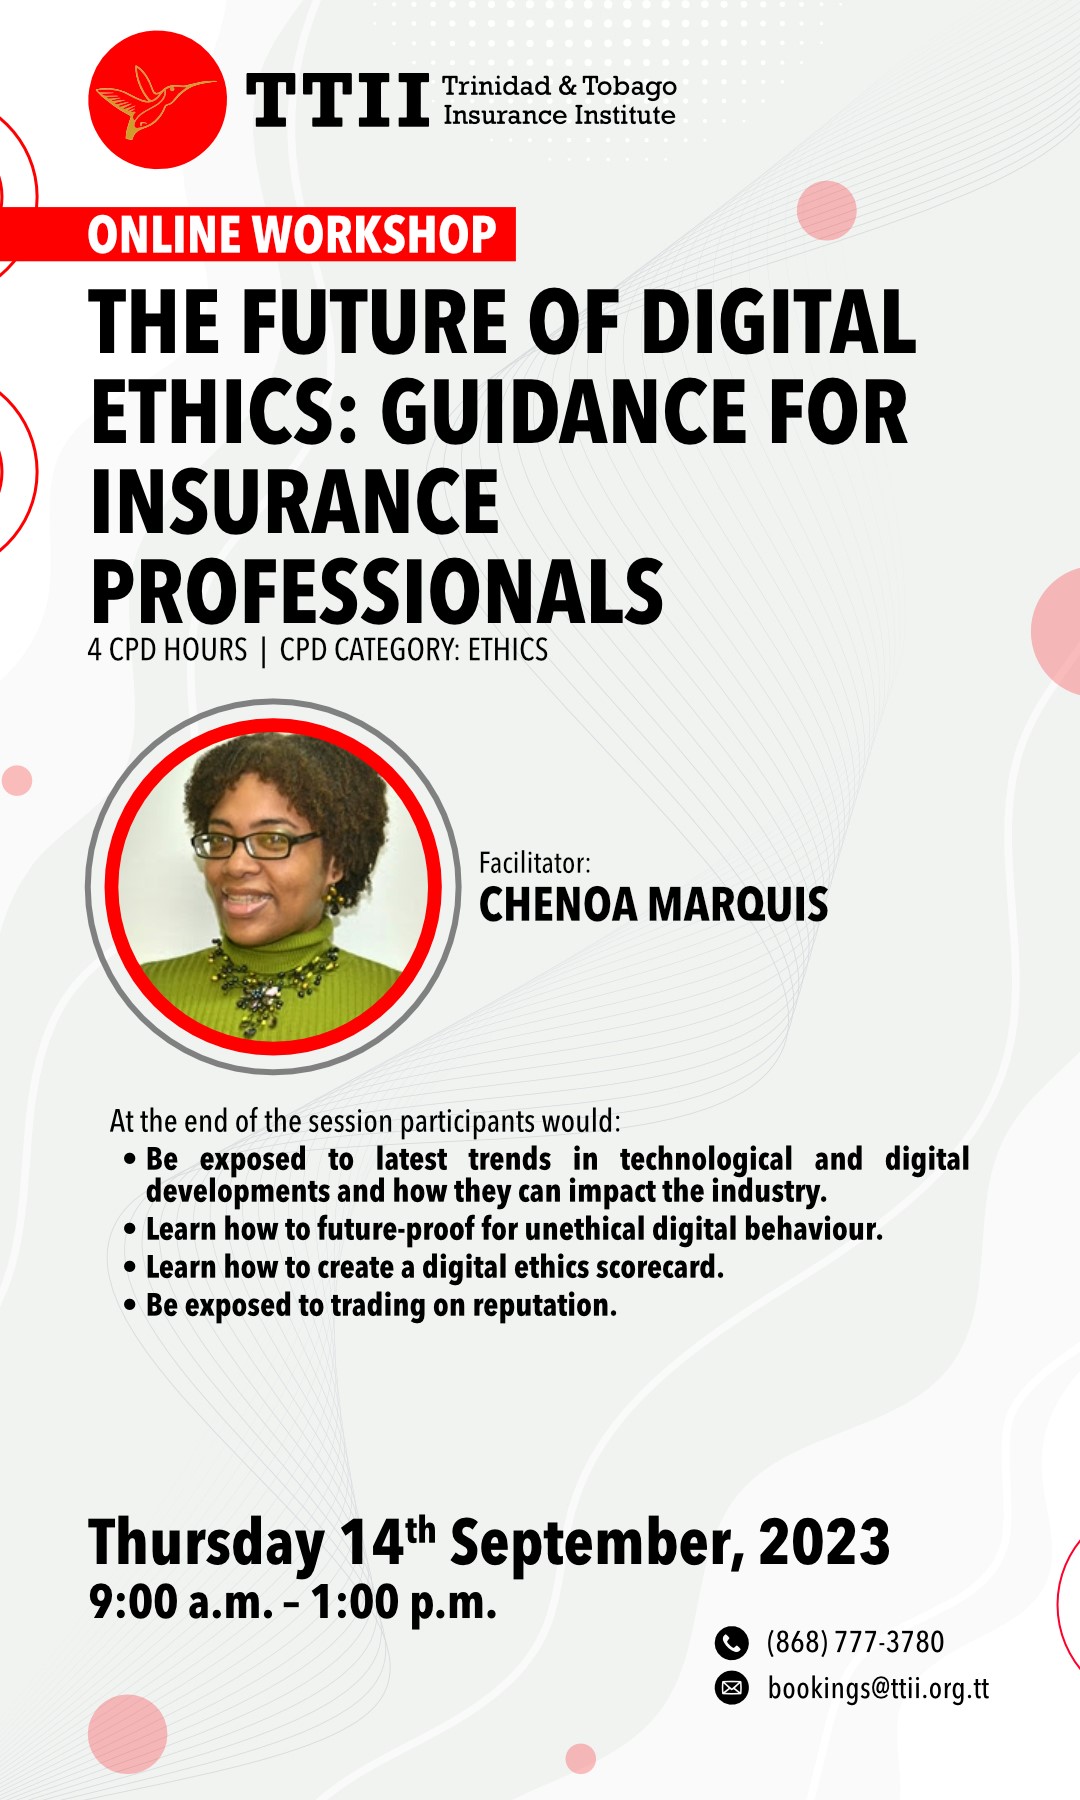 The Future of Digital Ethics: Guidance for Insurance Professionals